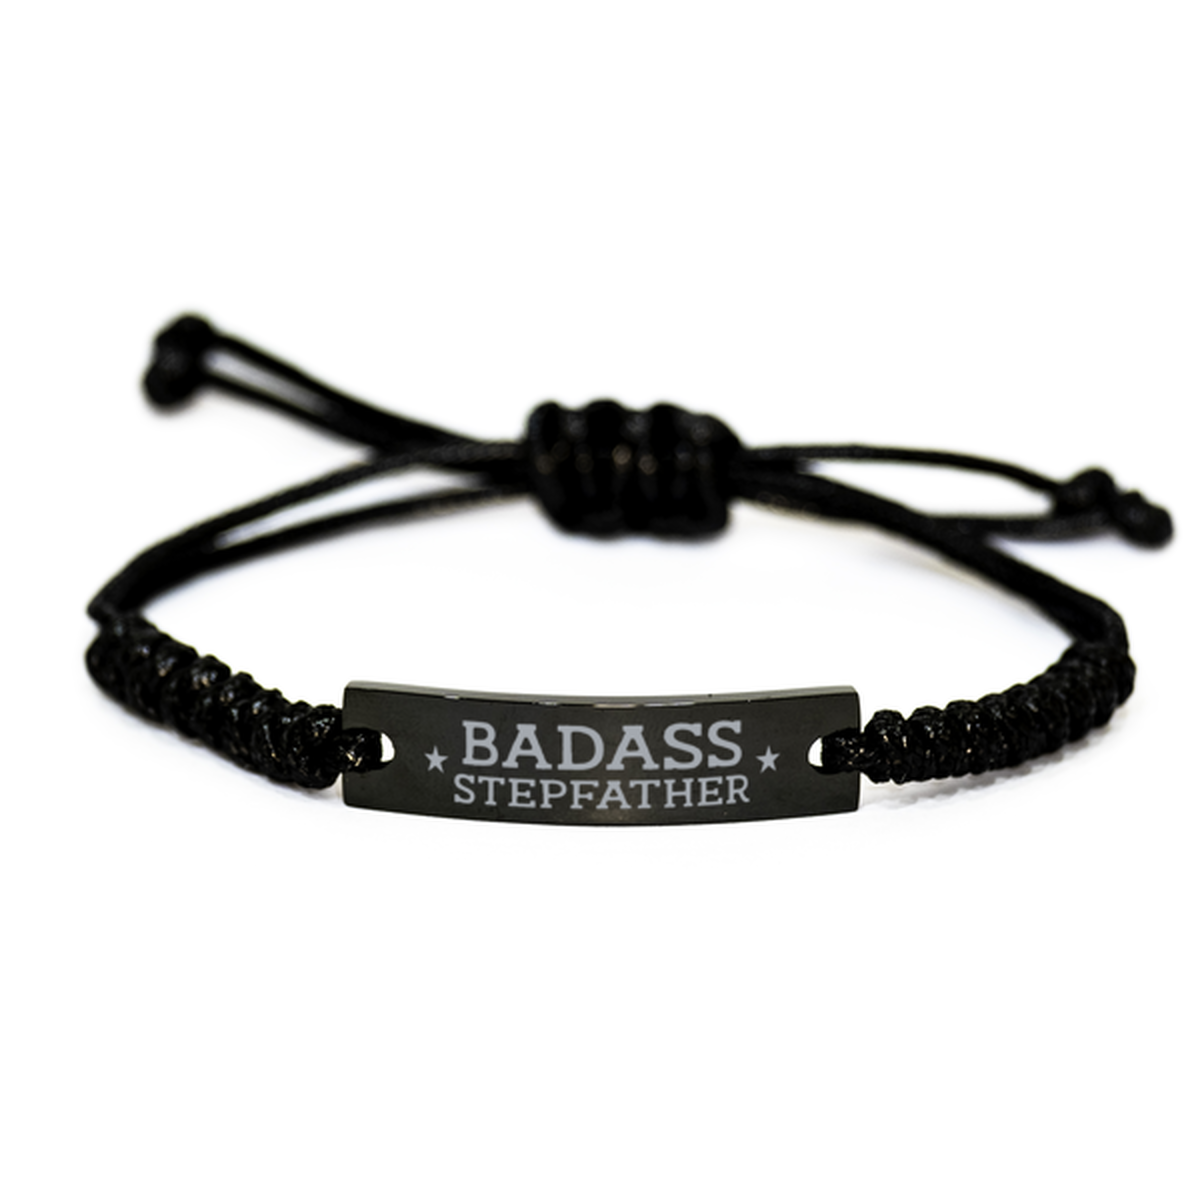 Stepfather Rope Bracelet, Badass Stepfather, Funny Family Gifts For Stepfather From Son Daughter